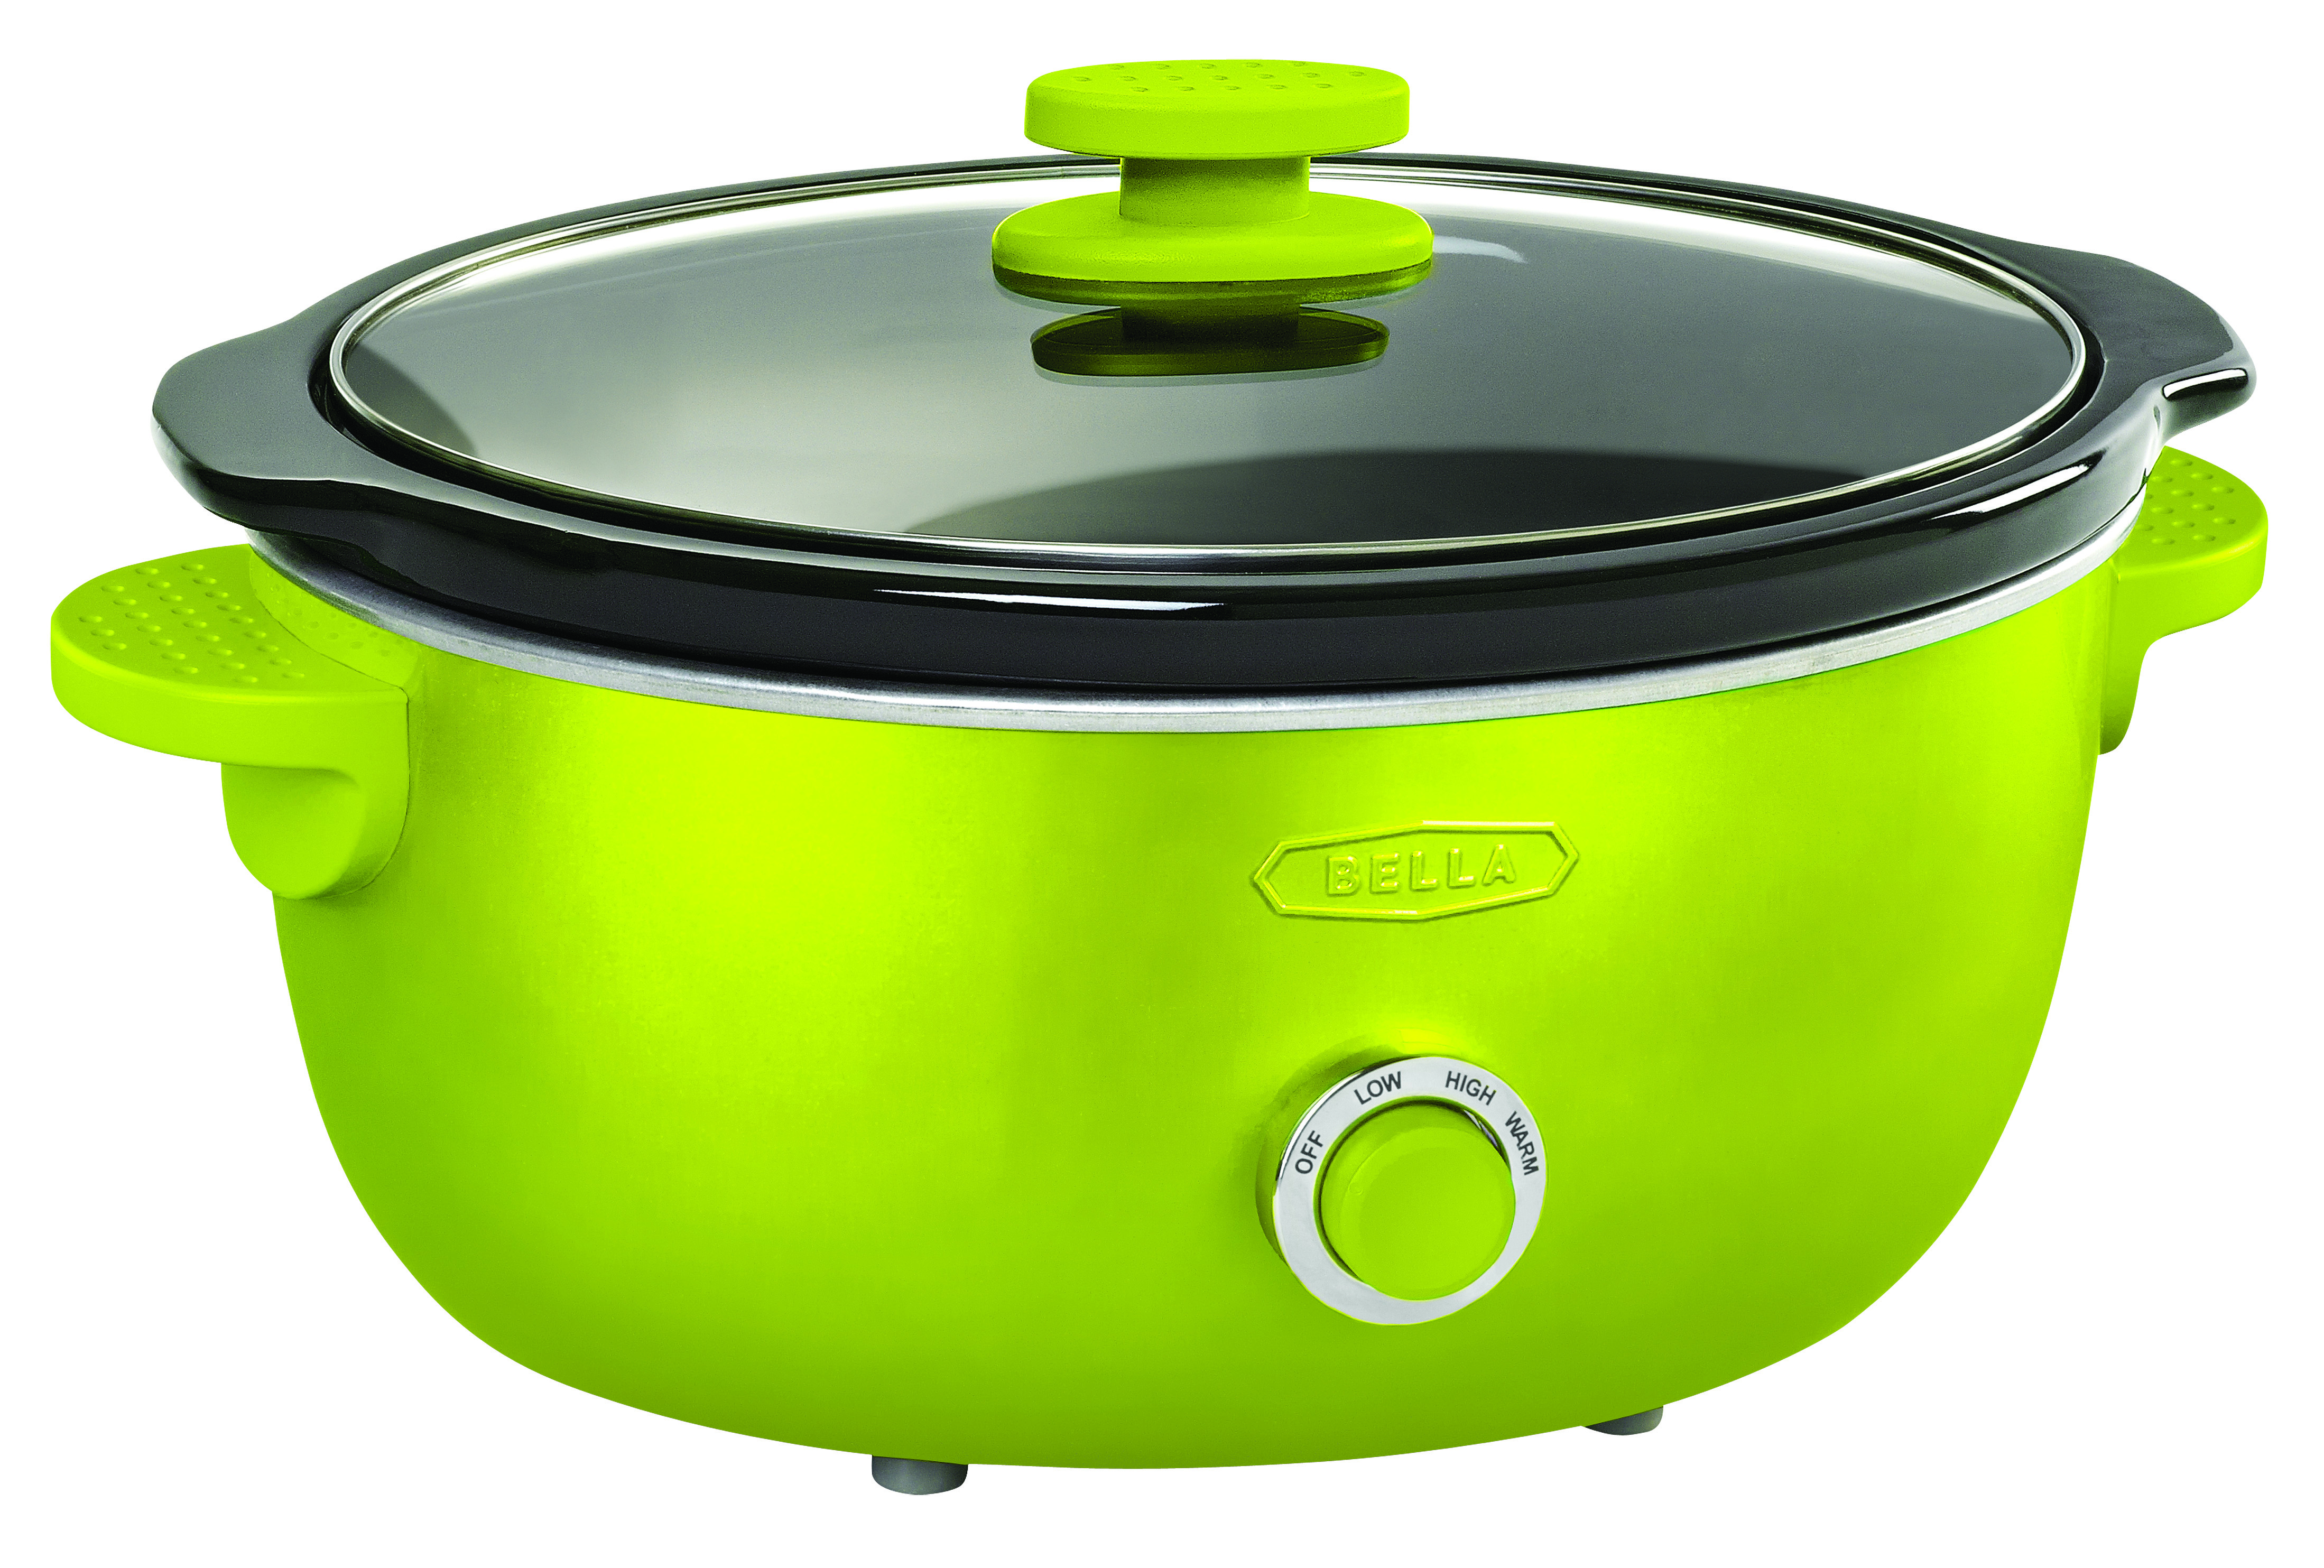 Bella Dots Slow Cooker Lime Green)